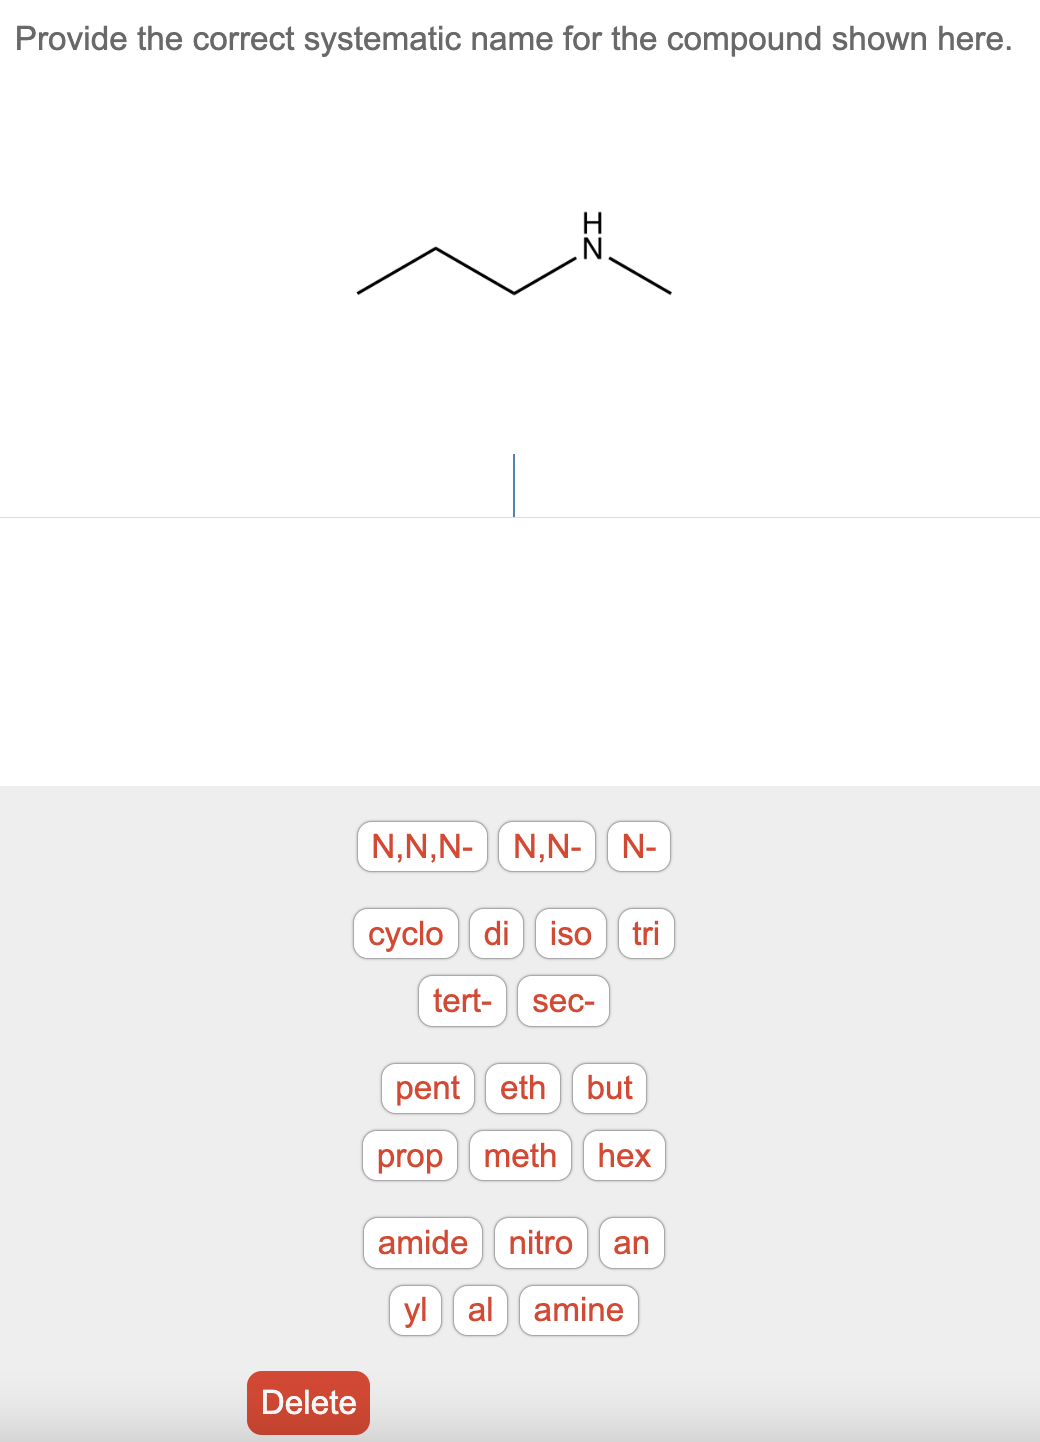 Provide the correct systematic name for the compound shown here.
Delete
N,N,N- N,N- N-
cyclo di iso tri
tert- sec-
pent eth but
prop meth hex
amide nitro an
yl al amine